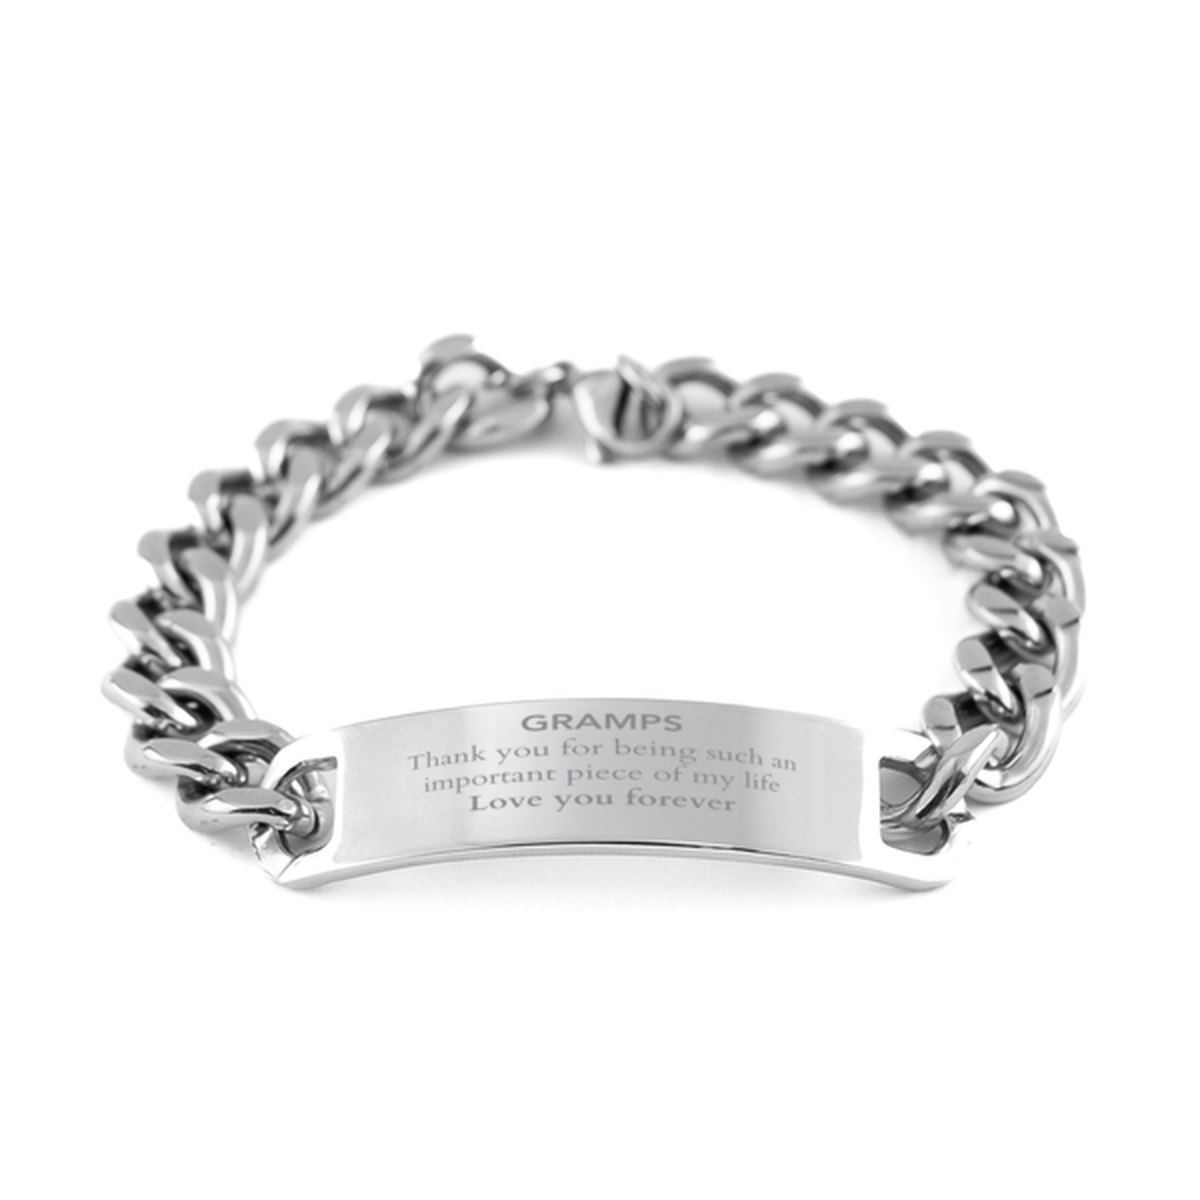 Appropriate Gramps Cuban Chain Stainless Steel Bracelet Epic Birthday Gifts for Gramps Thank you for being such an important piece of my life Gramps Christmas Mothers Fathers Day